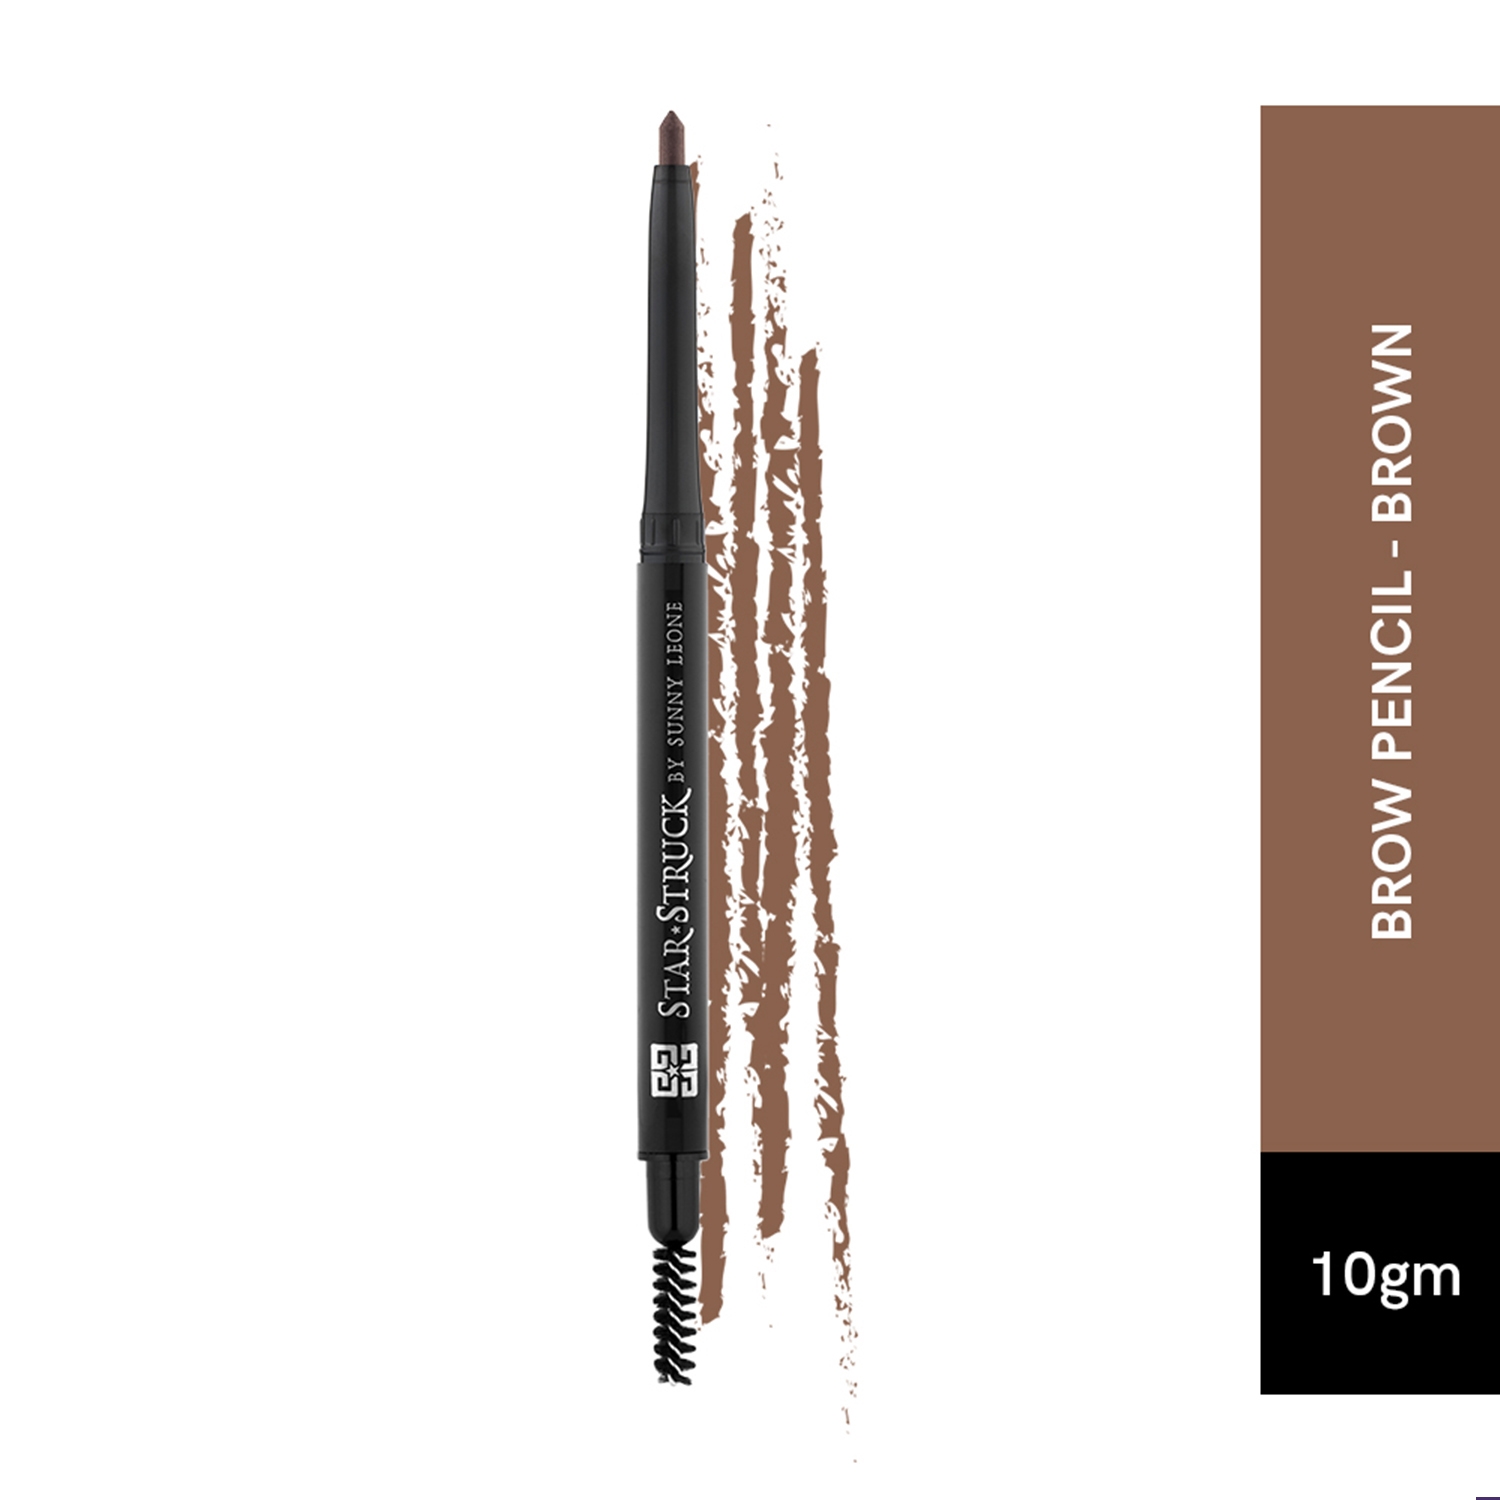 Star Struck by Sunny Leone | Star Struck by Sunny Leone Brow Pencil - Brown (0.25g)